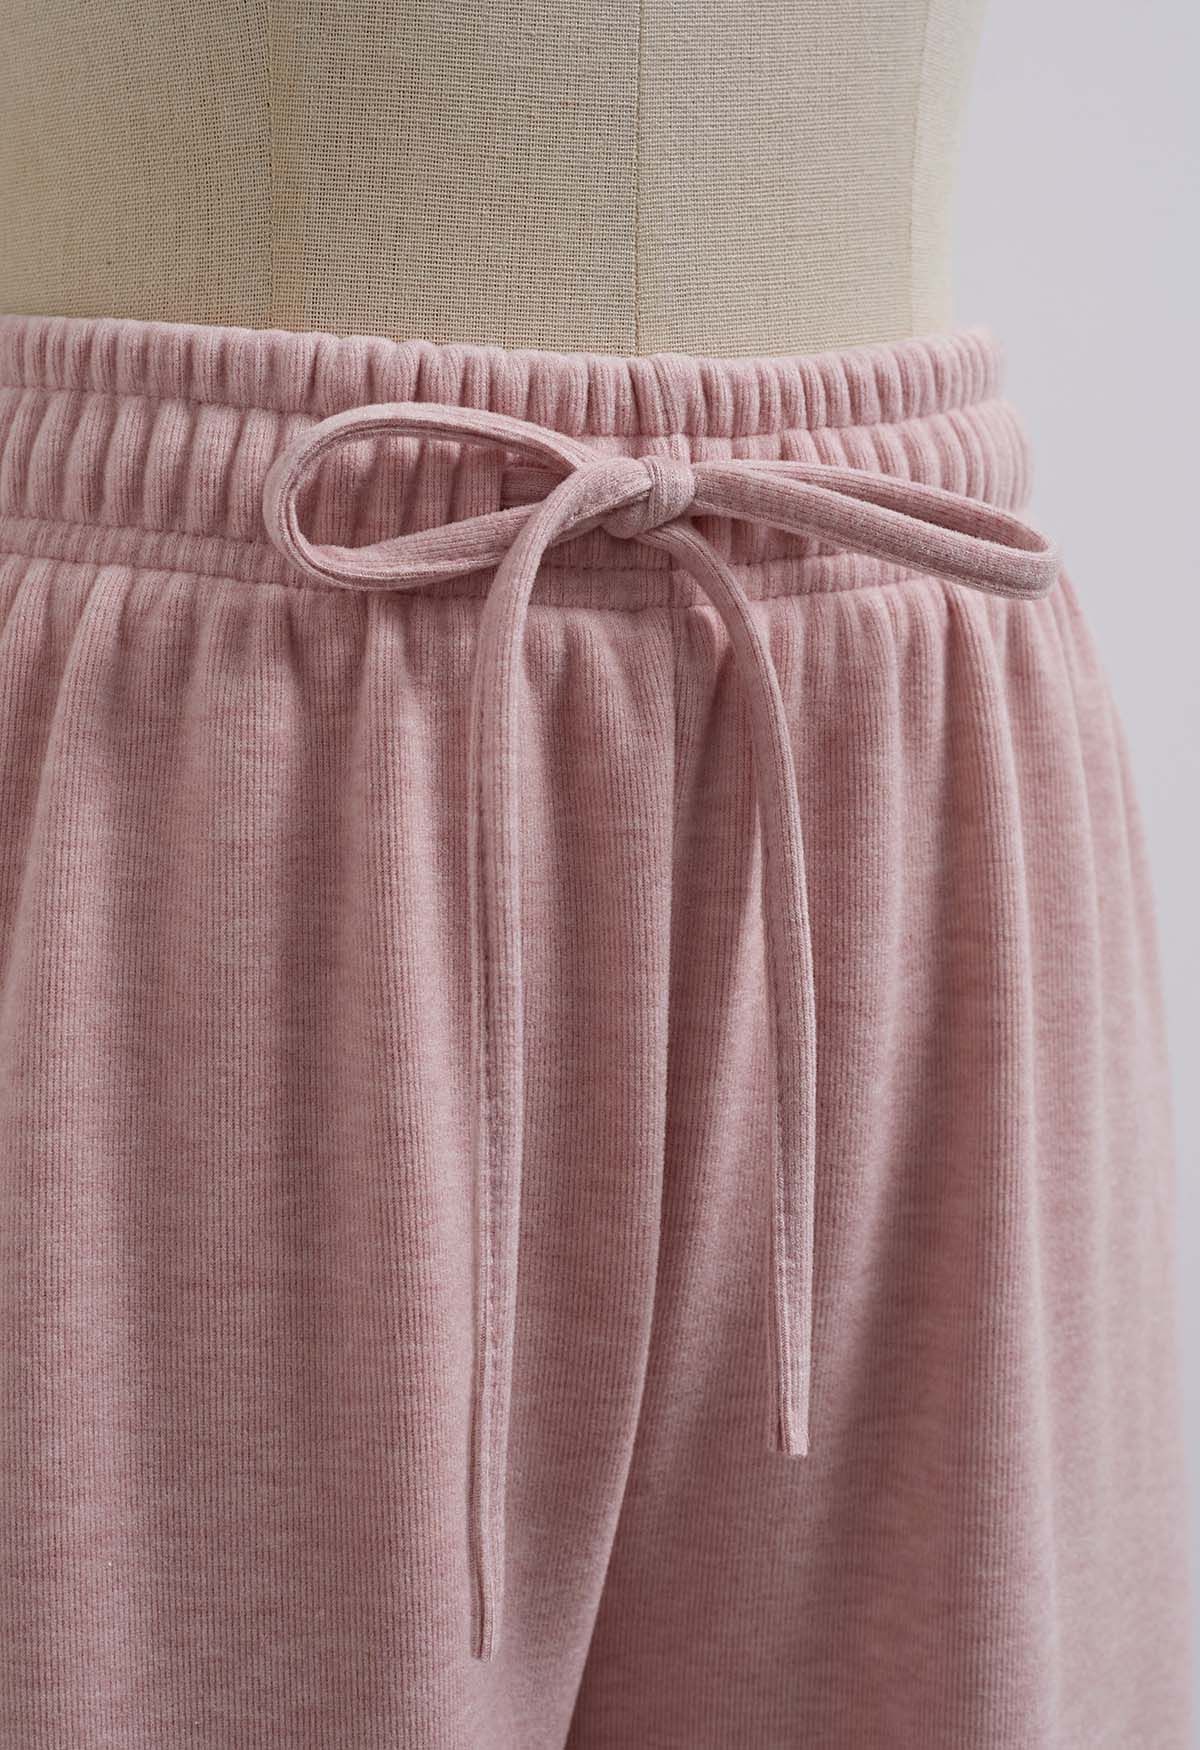 Velvet Lining Cozy Lounge Pants in Pink - Retro, Indie and Unique Fashion